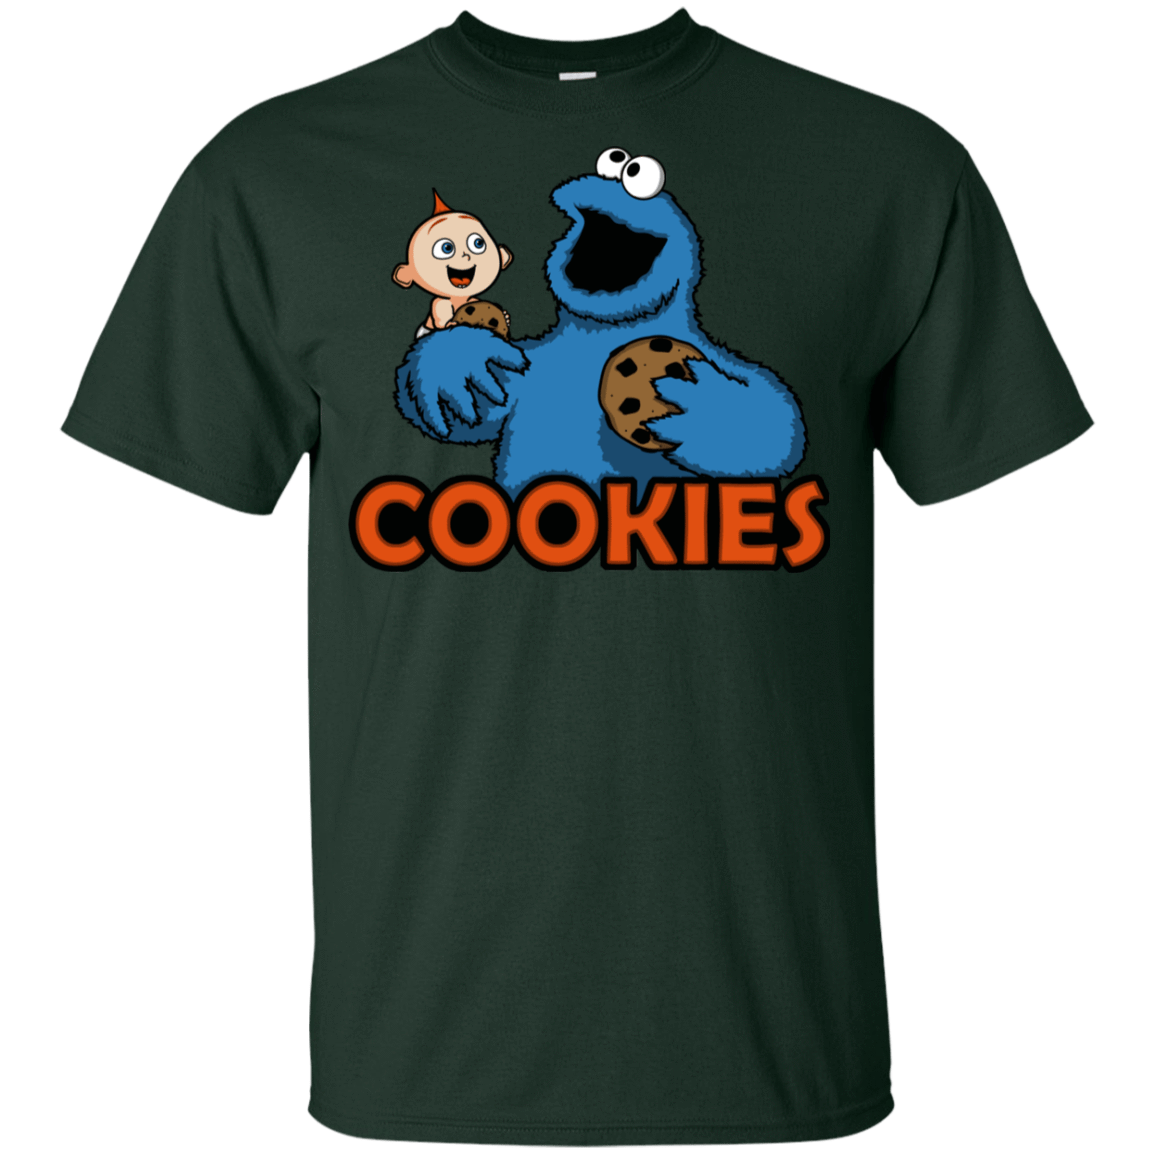 T-Shirts Forest / YXS Cookies Youth T-Shirt